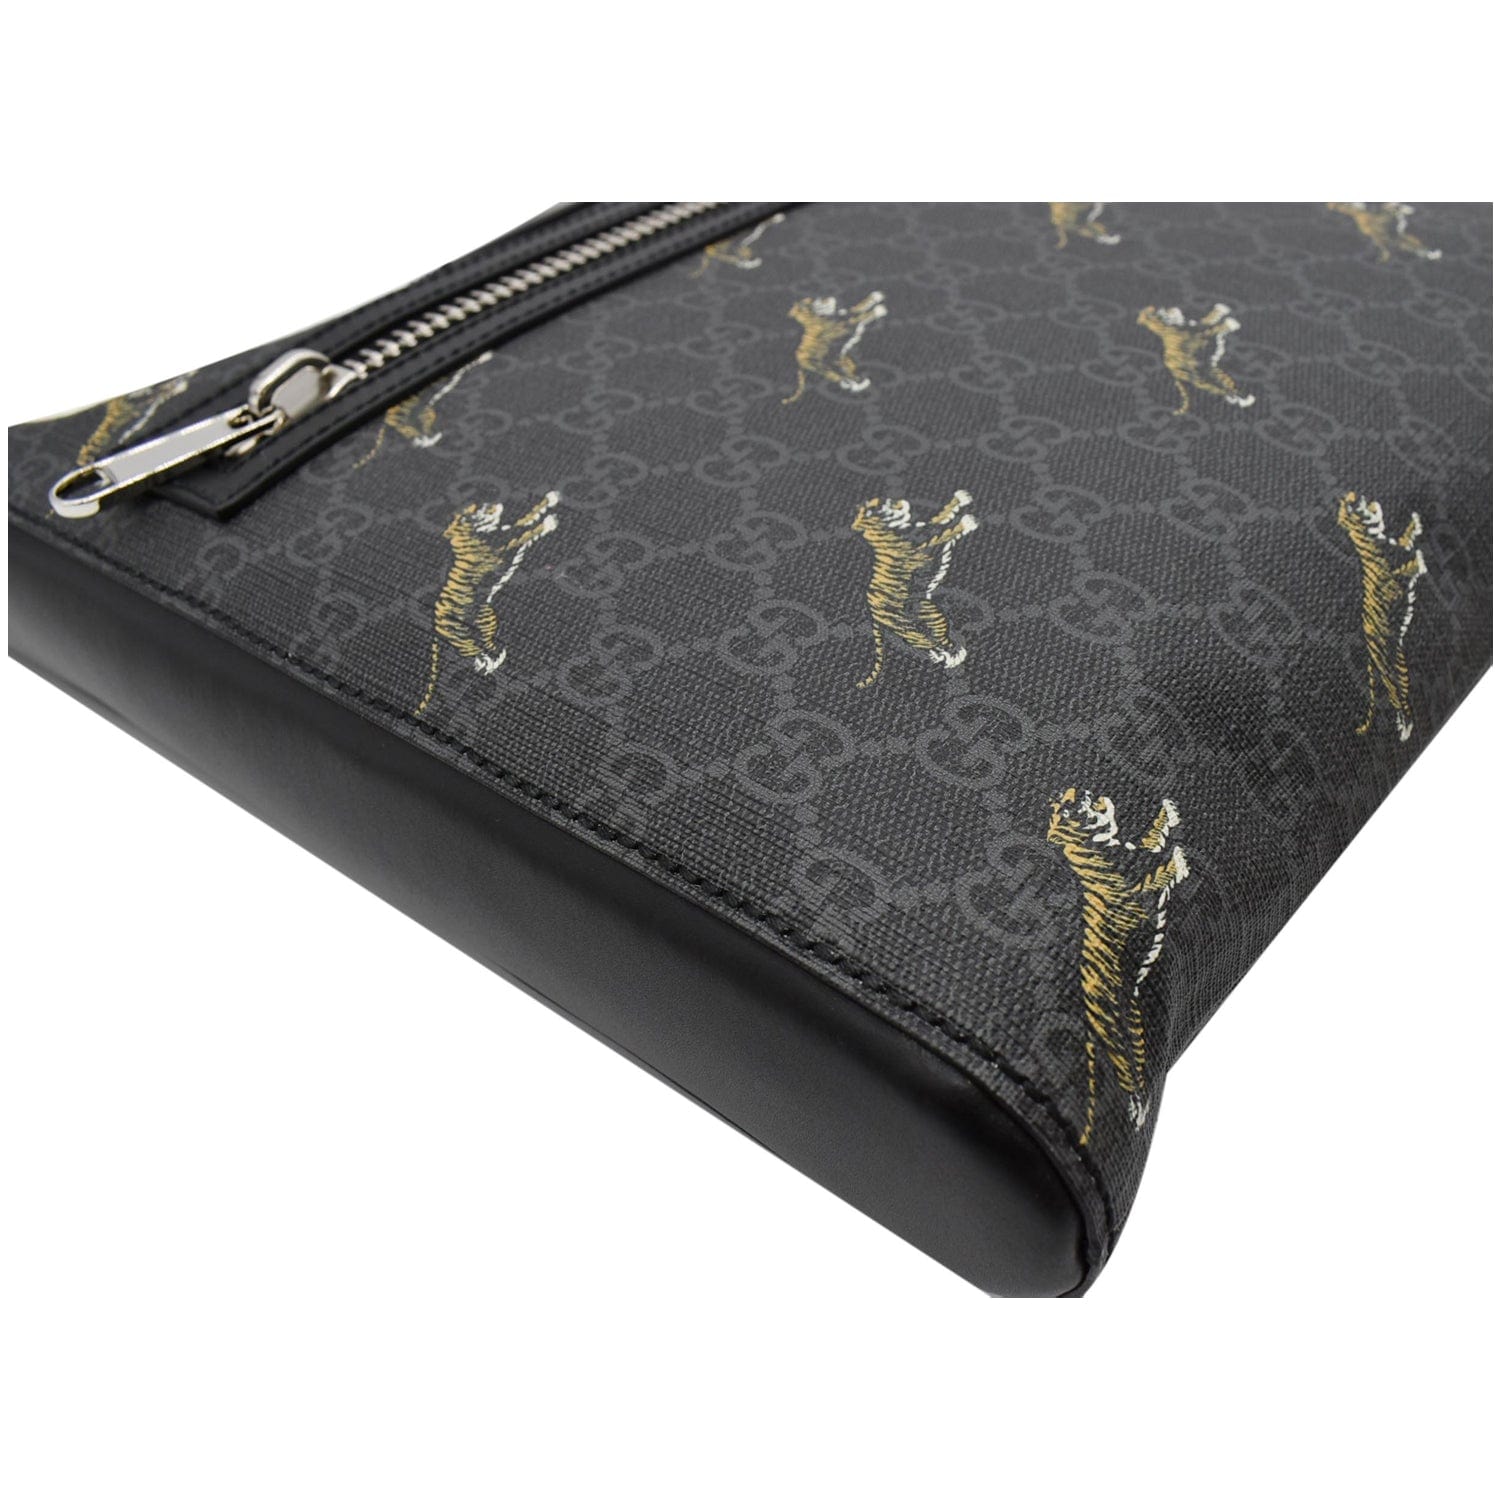 Gucci GG Supreme Tigers Bestiary Messenger Bag - A World Of Goods For You,  LLC